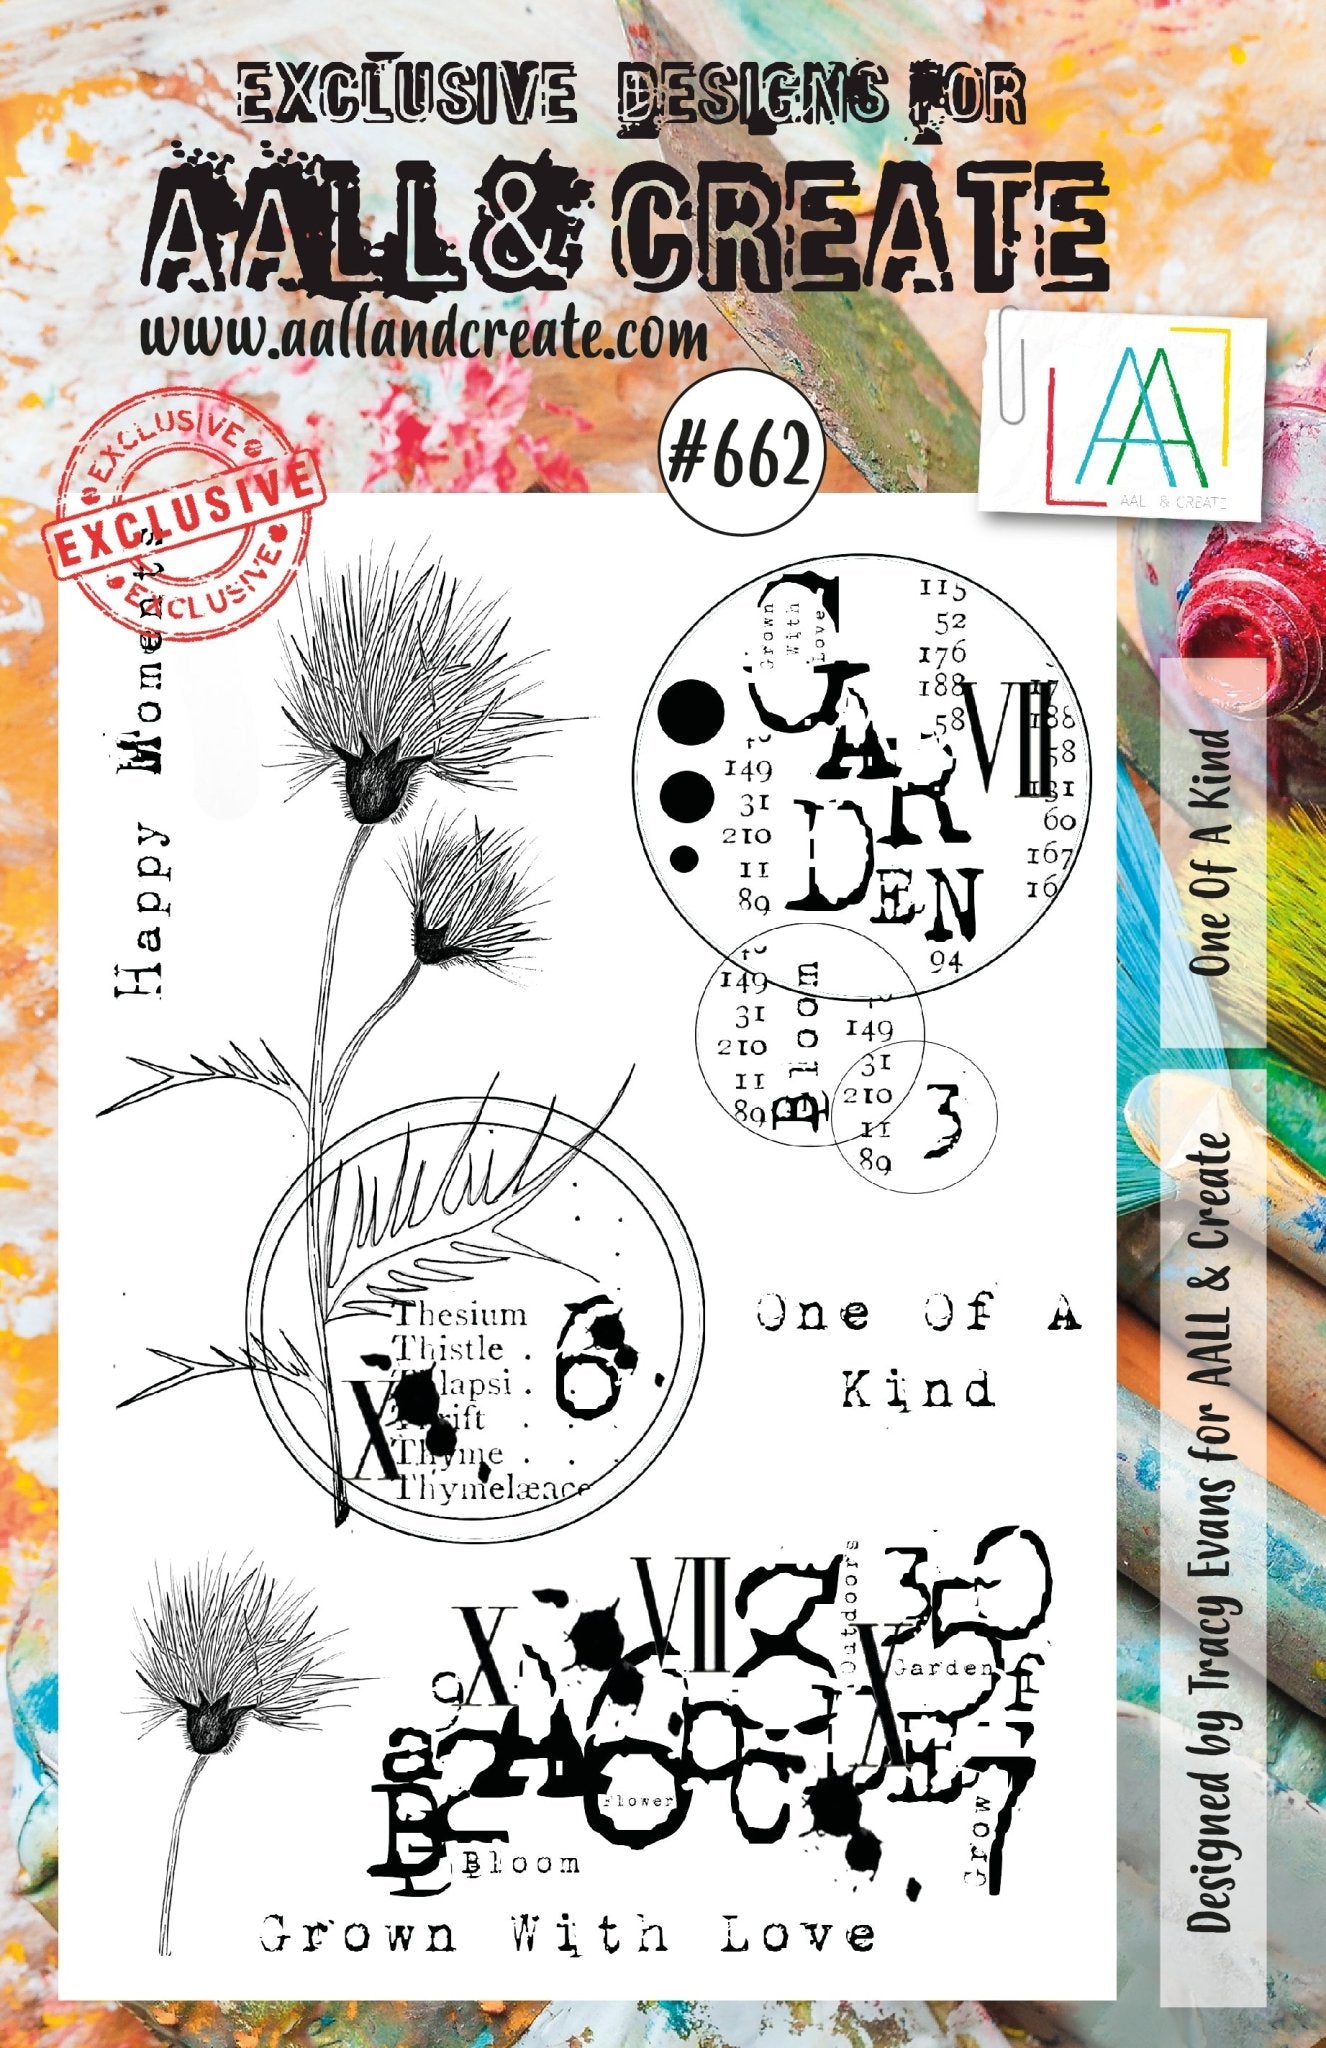 AALL and Create - One Of A Kind - A5 - Designer Tracy Evans - Clear Stamp Set - #662 Aall & Create